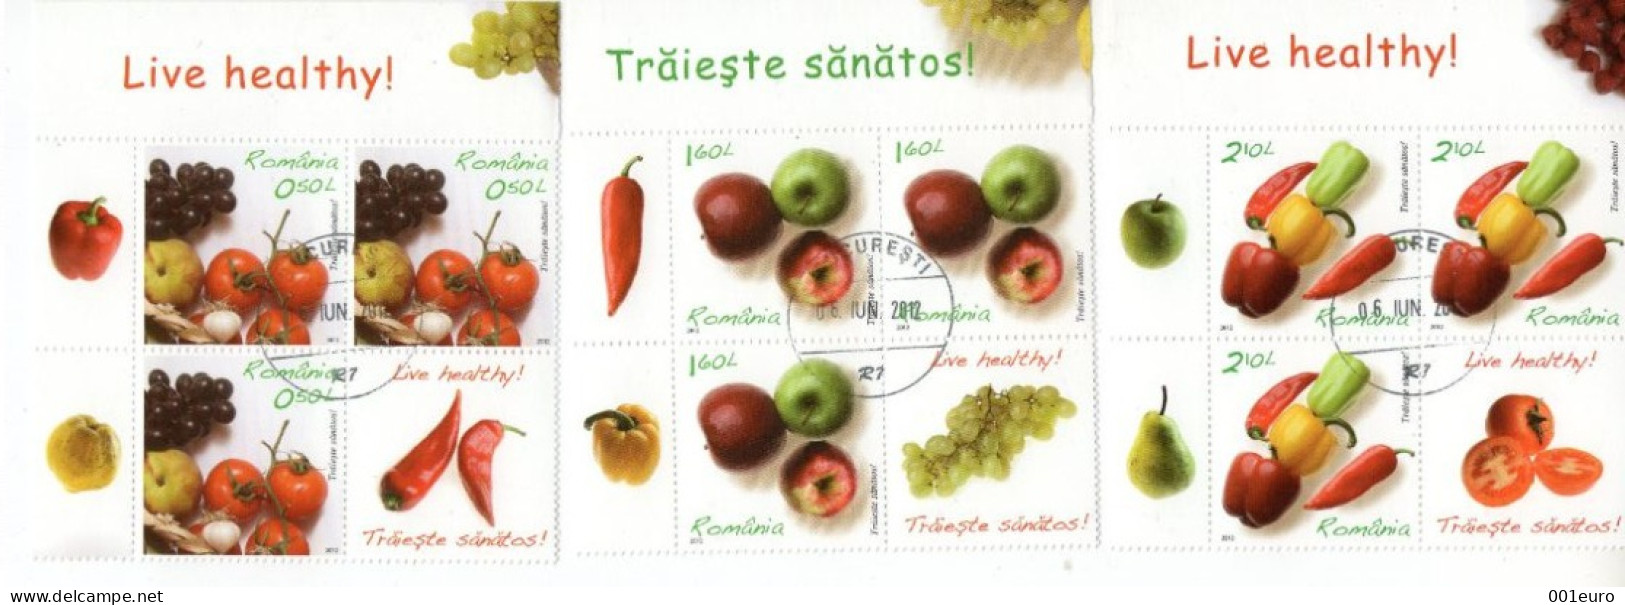 ROMANIA 2012: LIVE HEALTHY! FRUITS & VEGETABLES, Used Stamps X 3 + Vignettes - Registered Shipping! - Oblitérés